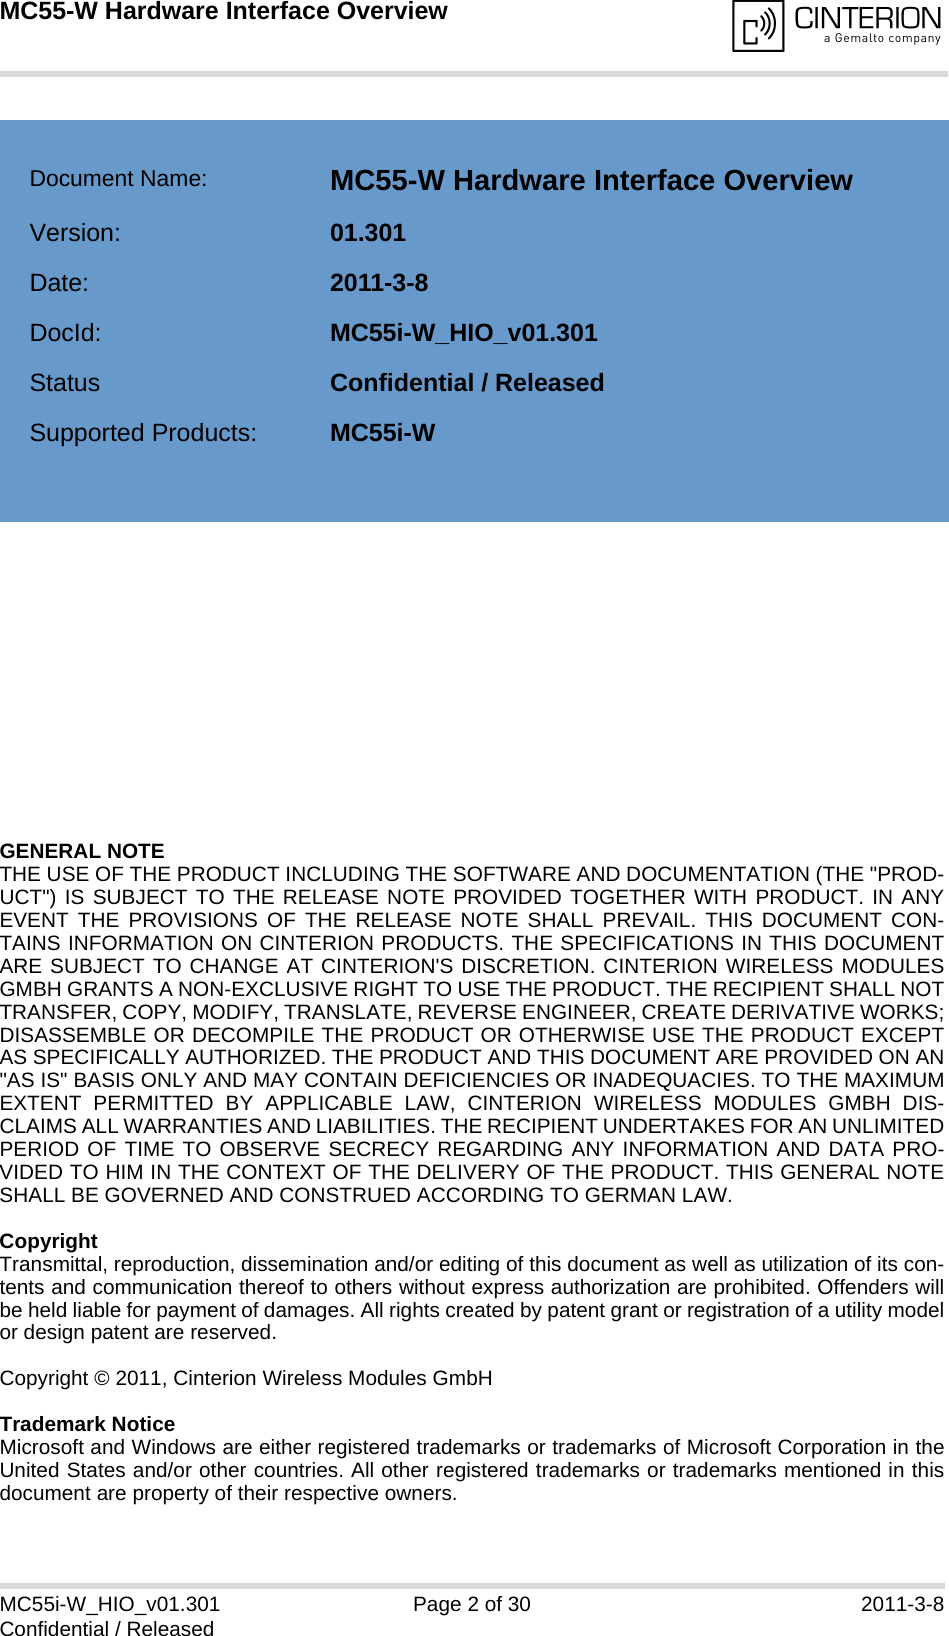 GENERAL NOTE THE USE OF THE PRODUCT INCLUDING THE SOFTWARE AND DOCUMENTATION (THE &quot;PROD-UCT&quot;) IS SUBJECT TO THE RELEASE NOTE PROVIDED TOGETHER WITH PRODUCT. IN ANYEVENT THE PROVISIONS OF THE RELEASE NOTE SHALL PREVAIL. THIS DOCUMENT CON-TAINS INFORMATION ON CINTERION PRODUCTS. THE SPECIFICATIONS IN THIS DOCUMENTARE SUBJECT TO CHANGE AT CINTERION&apos;S DISCRETION. CINTERION WIRELESS MODULESGMBH GRANTS A NON-EXCLUSIVE RIGHT TO USE THE PRODUCT. THE RECIPIENT SHALL NOTTRANSFER, COPY, MODIFY, TRANSLATE, REVERSE ENGINEER, CREATE DERIVATIVE WORKS;DISASSEMBLE OR DECOMPILE THE PRODUCT OR OTHERWISE USE THE PRODUCT EXCEPTAS SPECIFICALLY AUTHORIZED. THE PRODUCT AND THIS DOCUMENT ARE PROVIDED ON AN&quot;AS IS&quot; BASIS ONLY AND MAY CONTAIN DEFICIENCIES OR INADEQUACIES. TO THE MAXIMUMEXTENT PERMITTED BY APPLICABLE LAW, CINTERION WIRELESS MODULES GMBH DIS-CLAIMS ALL WARRANTIES AND LIABILITIES. THE RECIPIENT UNDERTAKES FOR AN UNLIMITEDPERIOD OF TIME TO OBSERVE SECRECY REGARDING ANY INFORMATION AND DATA PRO-VIDED TO HIM IN THE CONTEXT OF THE DELIVERY OF THE PRODUCT. THIS GENERAL NOTESHALL BE GOVERNED AND CONSTRUED ACCORDING TO GERMAN LAW.CopyrightTransmittal, reproduction, dissemination and/or editing of this document as well as utilization of its con-tents and communication thereof to others without express authorization are prohibited. Offenders willbe held liable for payment of damages. All rights created by patent grant or registration of a utility modelor design patent are reserved. Copyright © 2011, Cinterion Wireless Modules GmbH Trademark NoticeMicrosoft and Windows are either registered trademarks or trademarks of Microsoft Corporation in theUnited States and/or other countries. All other registered trademarks or trademarks mentioned in thisdocument are property of their respective owners.MC55i-W_HIO_v01.301 Page 2 of 30 2011-3-8Confidential / ReleasedMC55-W Hardware Interface Overview2Document Name: MC55-W Hardware Interface OverviewVersion: 01.301Date: 2011-3-8DocId: MC55i-W_HIO_v01.301Status Confidential / ReleasedSupported Products: MC55i-W